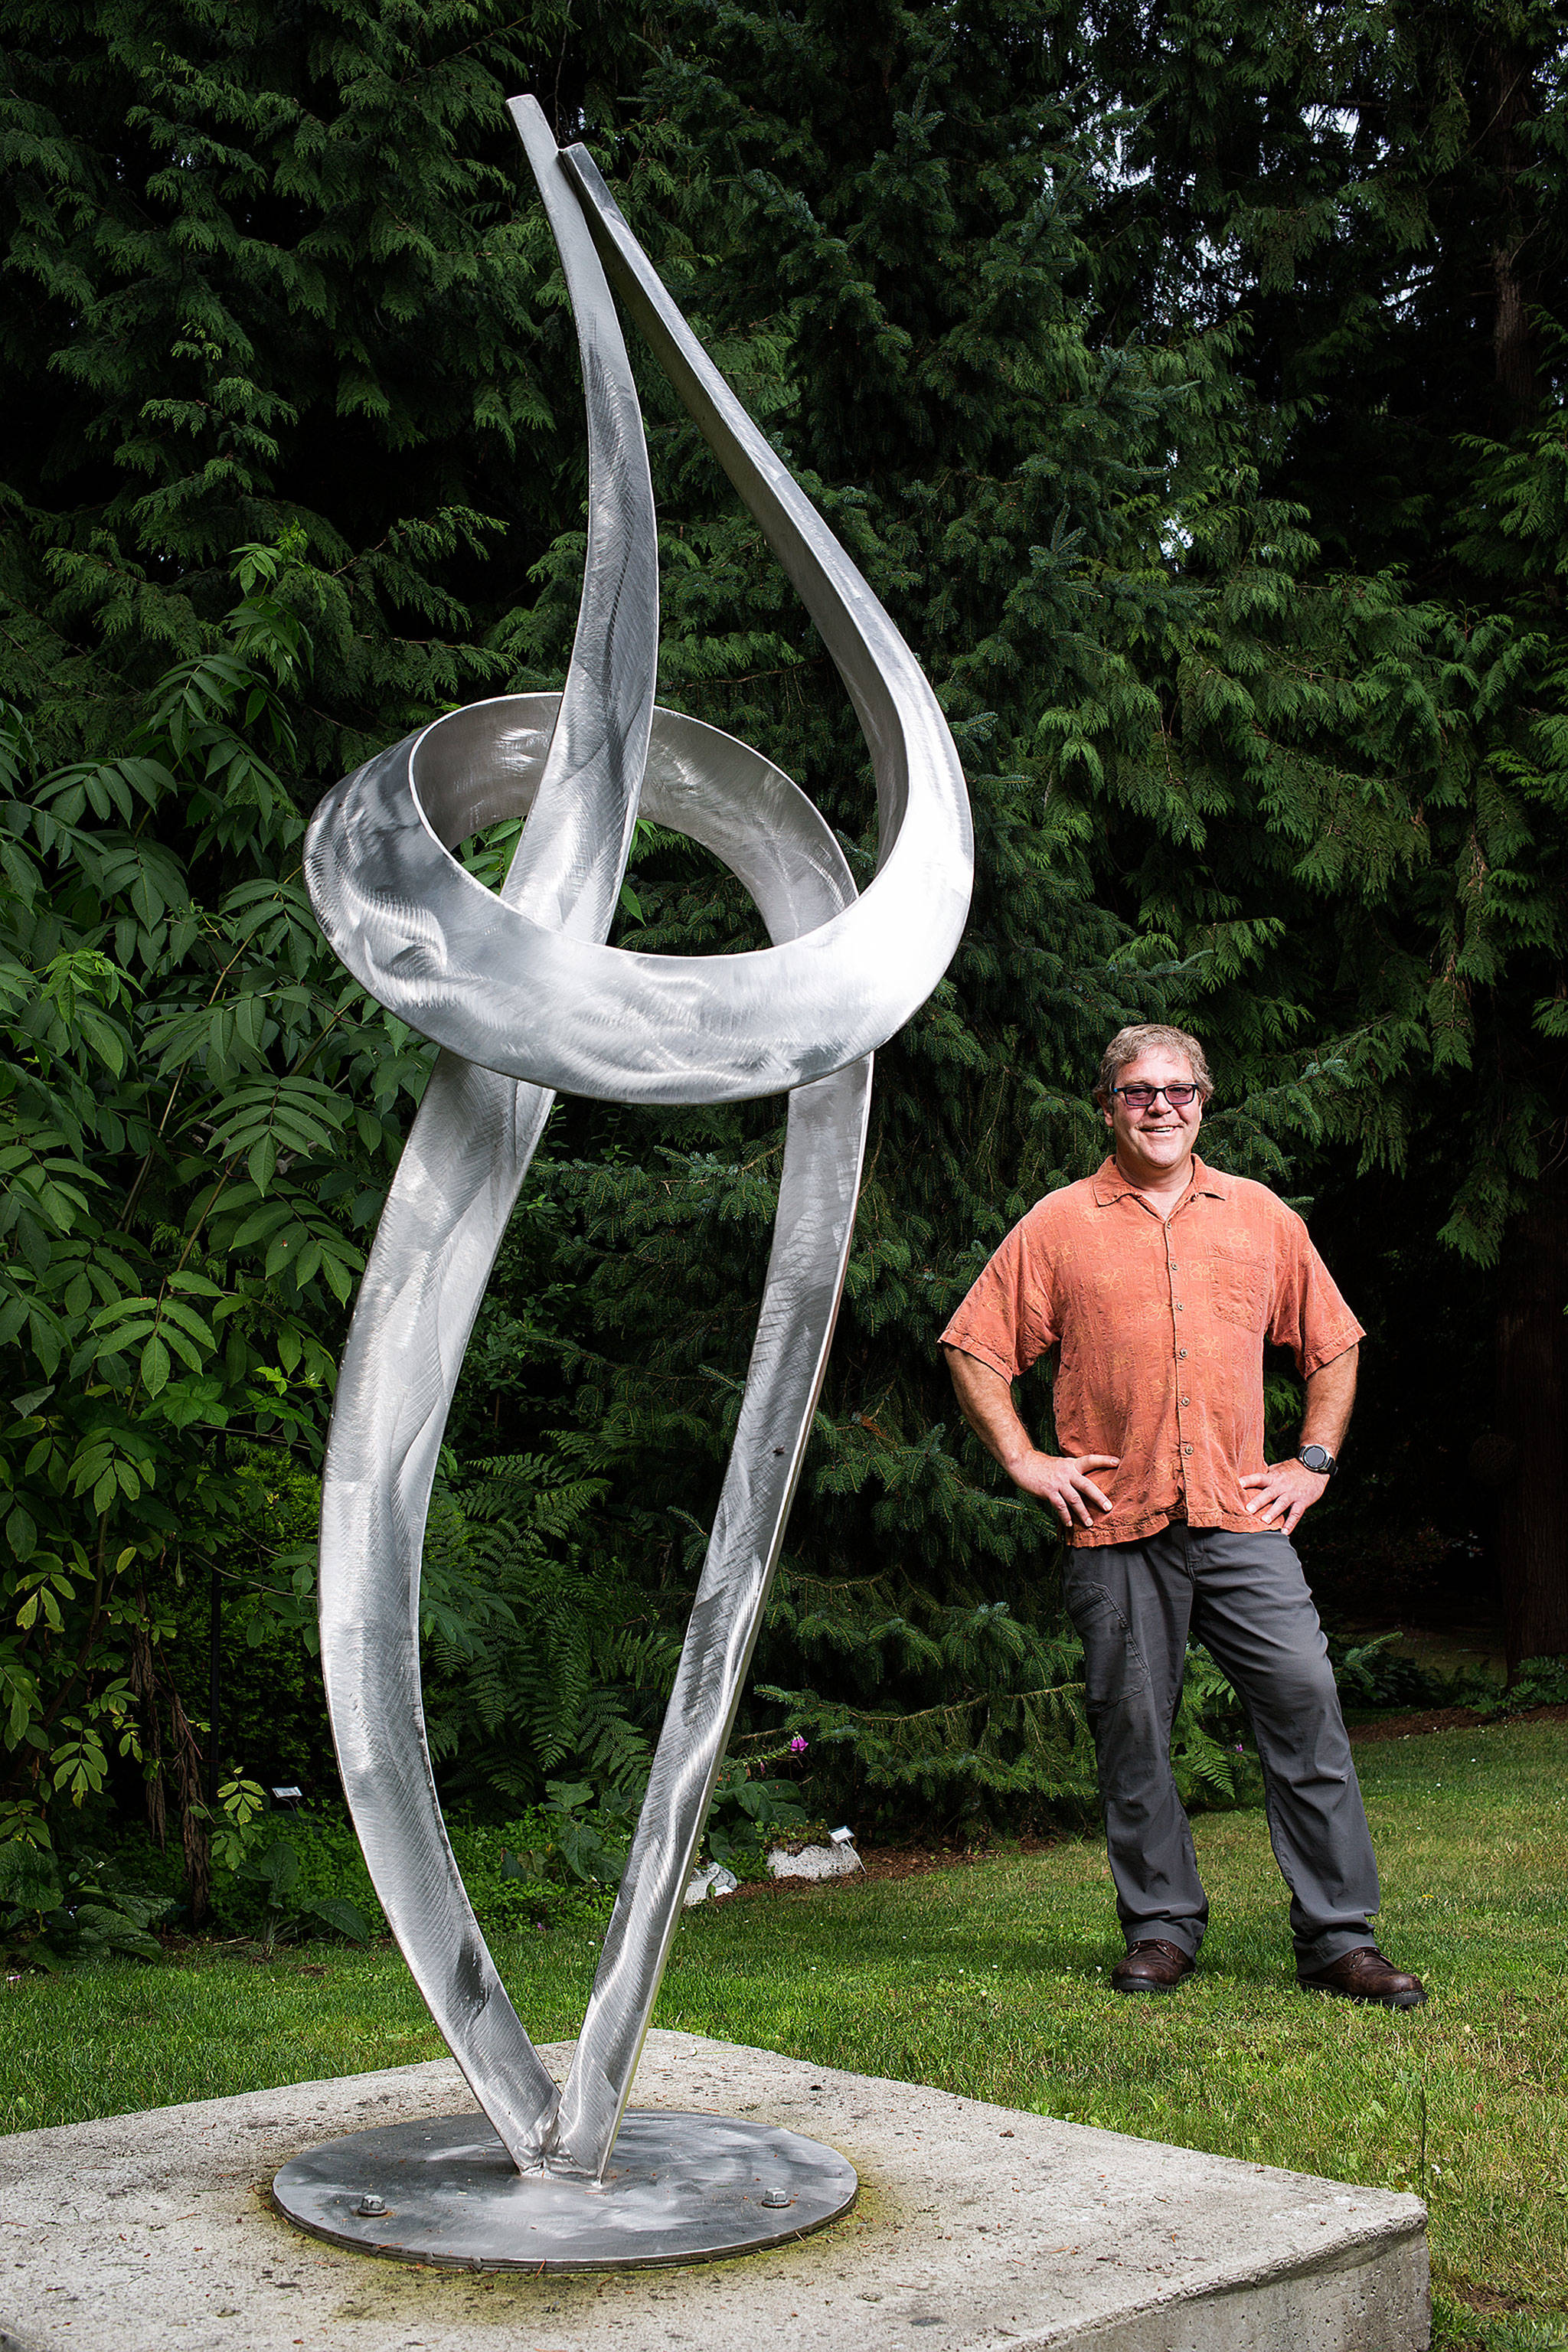 Micajah Bienvenu’s sculpture, “Wild Embrace,” is part of his “Summer Moments” exhibit at Matzke Fine Art Gallery and Sculpture Park on Camano Island. (Andy Bronson / The Herald)